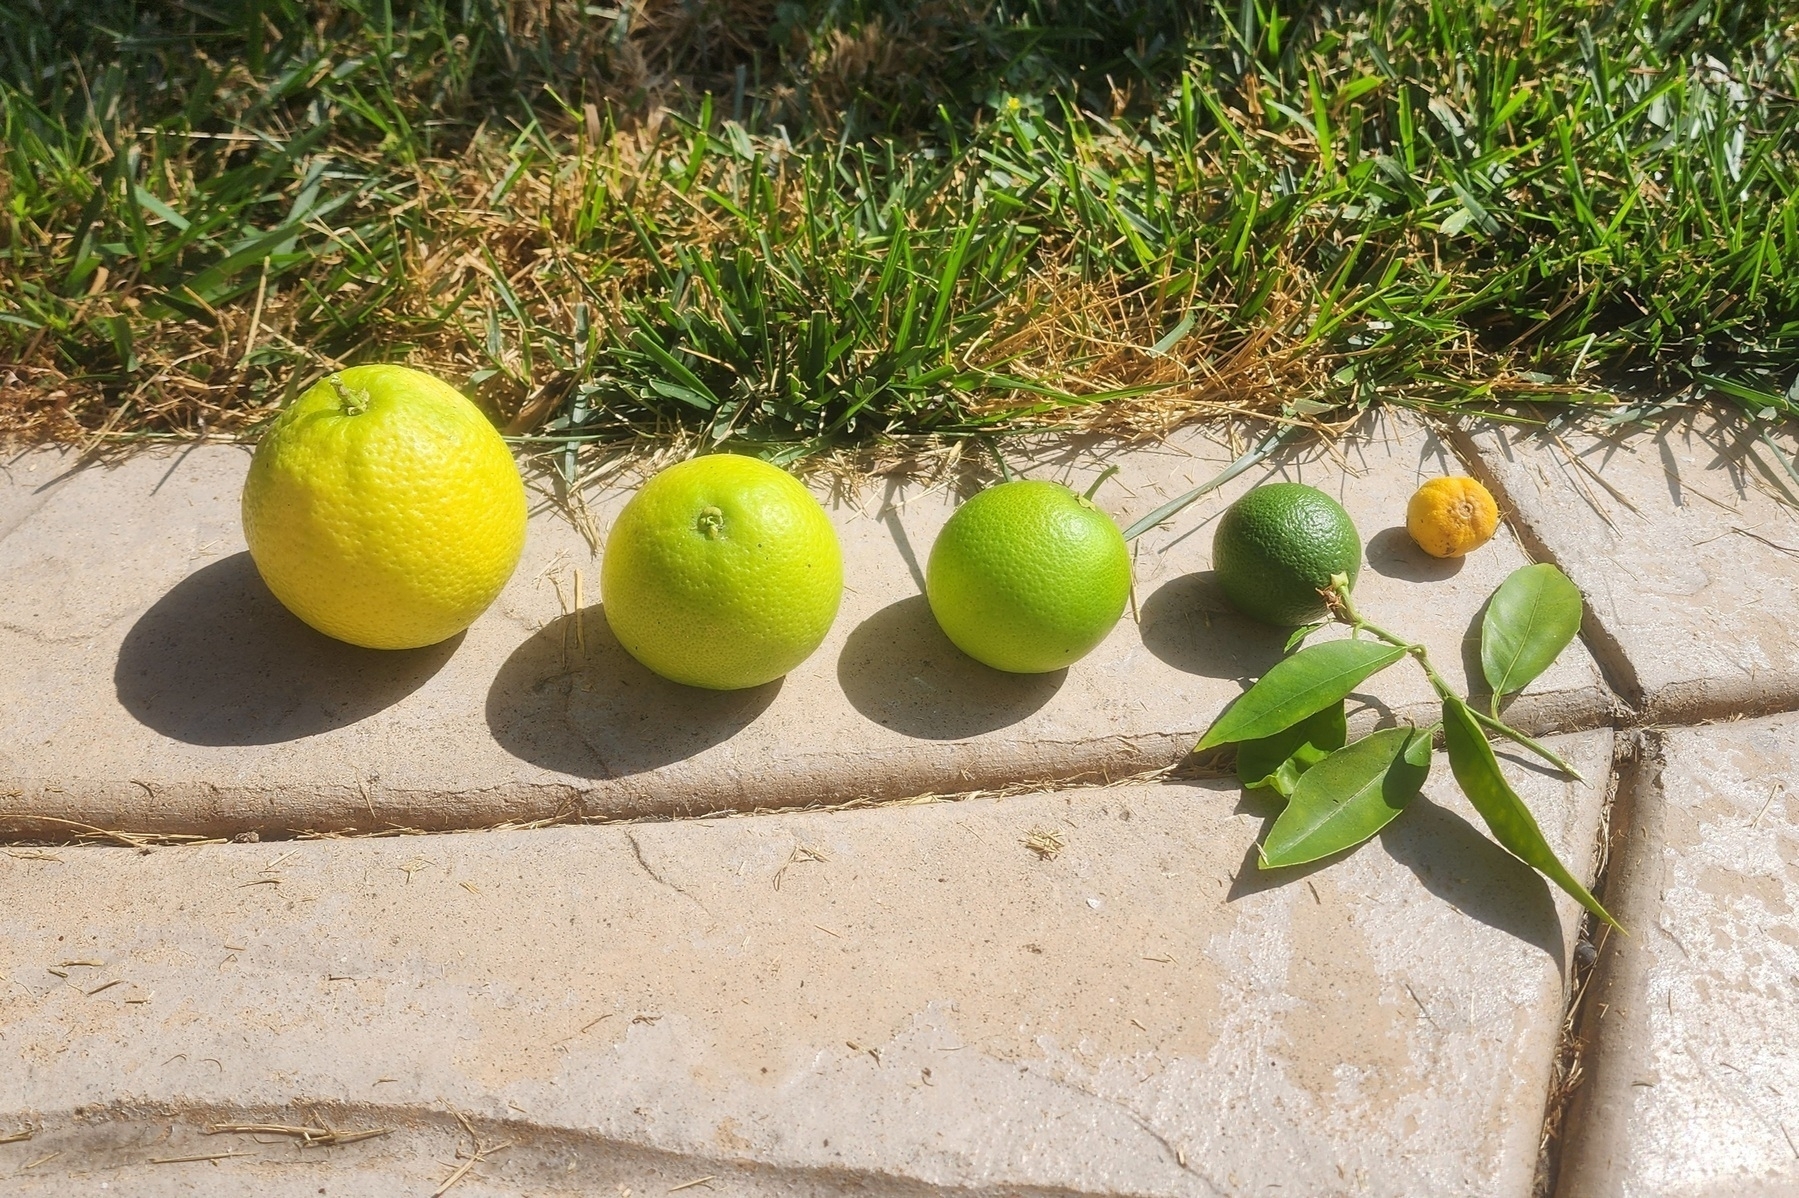 Five limes, arranged from most to least ripe (left to right)